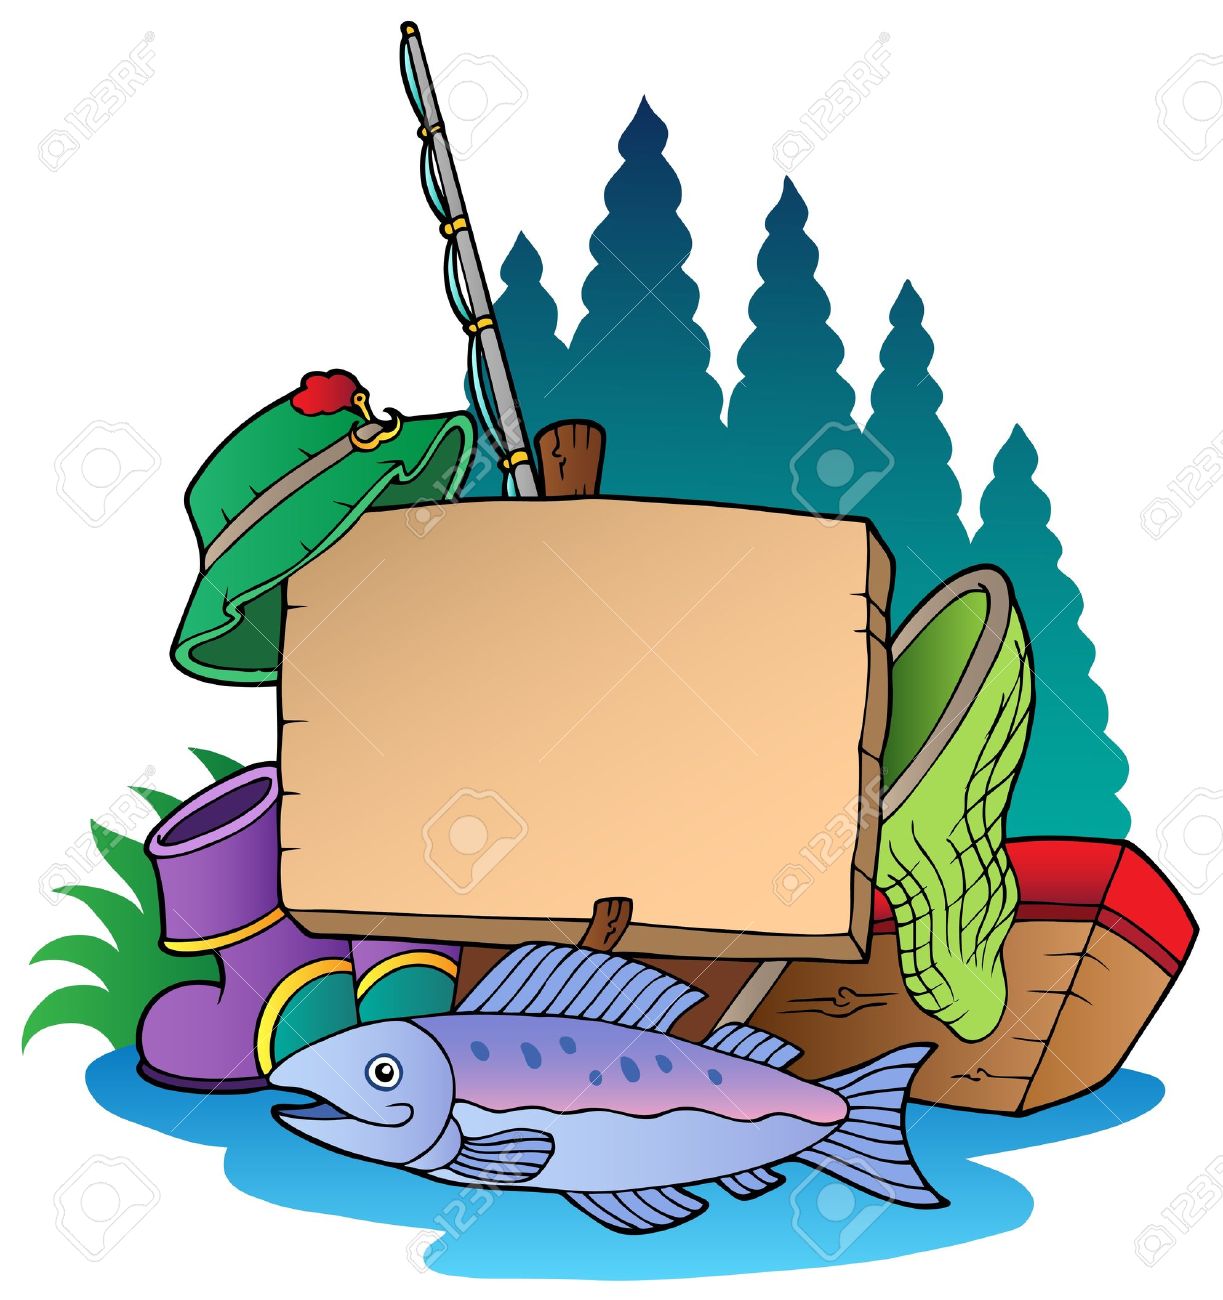 Download Fishing supplies clipart 20 free Cliparts | Download ...